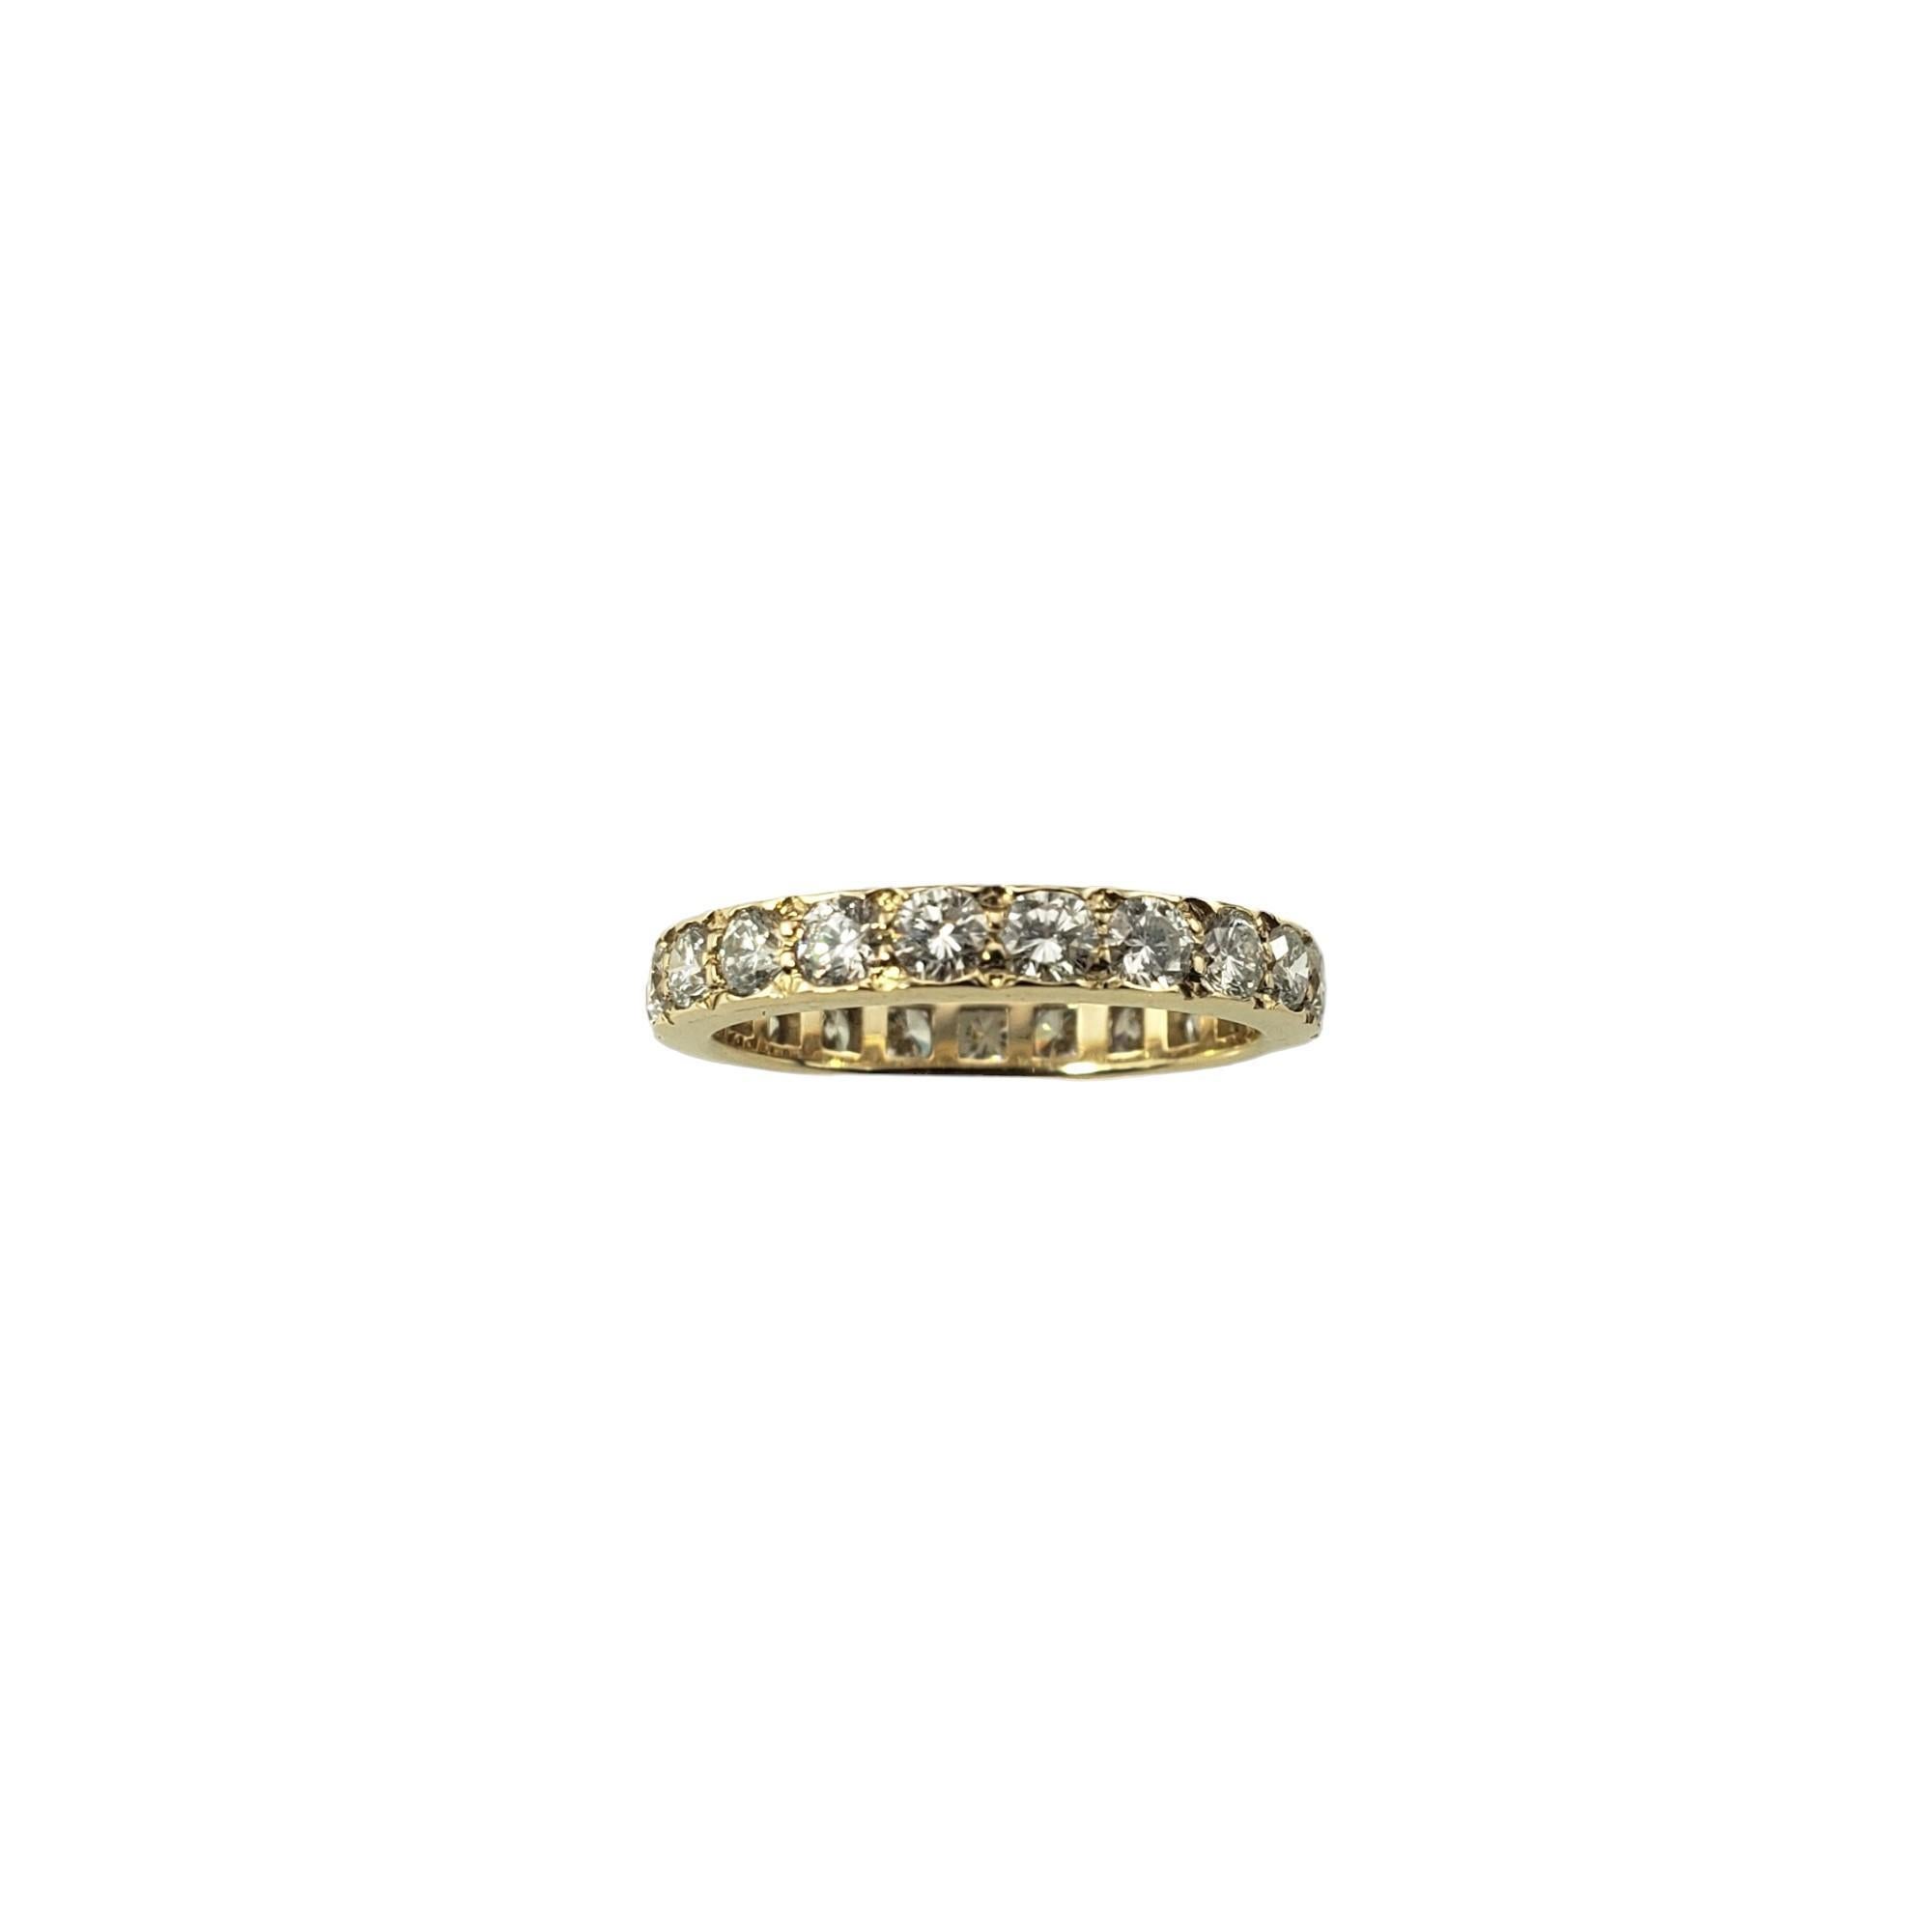 Vintage 14 Karat Yellow Gold Diamond Eternity Band-

This sparkling eternity band features 22 round brilliant cut diamonds set in beautifully detailed 14K yellow gold.  Width:  3 mm.

Approximate total diamond weight:   1.76 ct.

Diamond clarity: